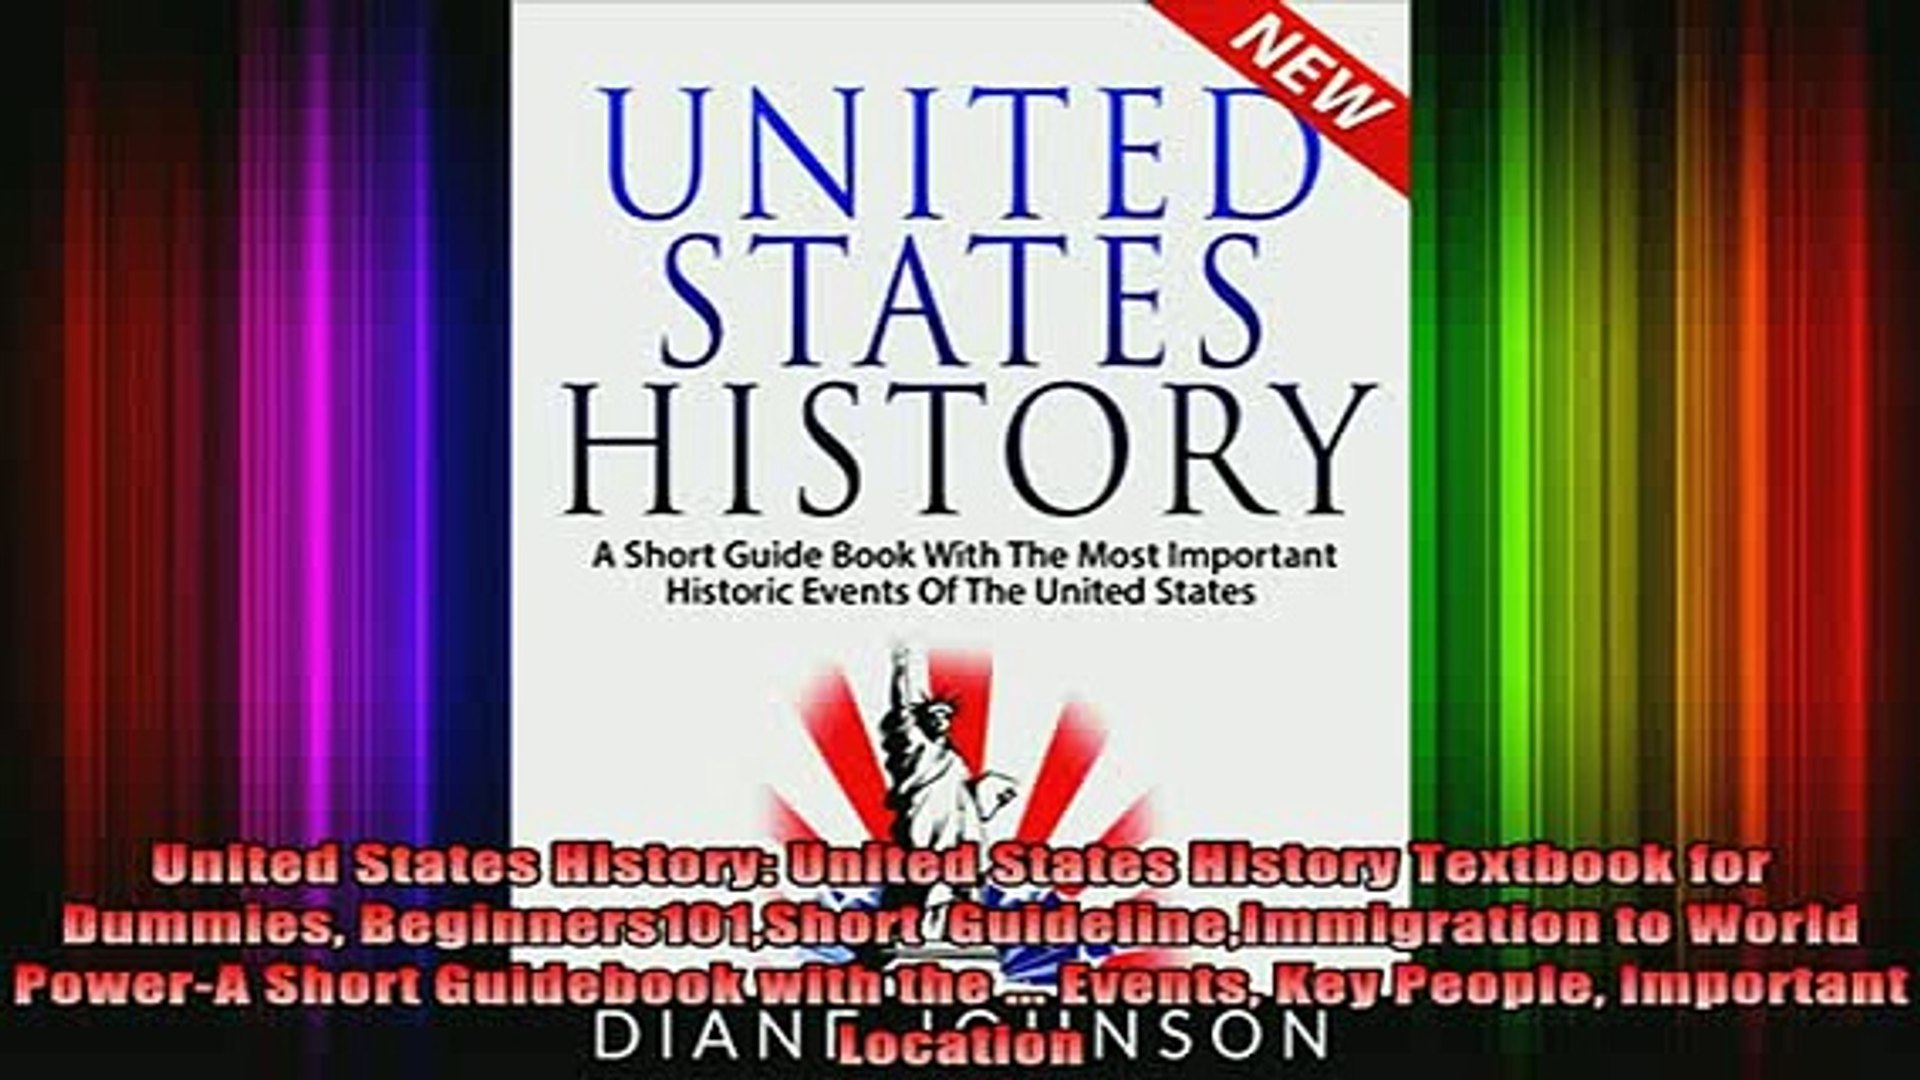 The United States History for Everyone: A Guide to Getting the Facts Straight